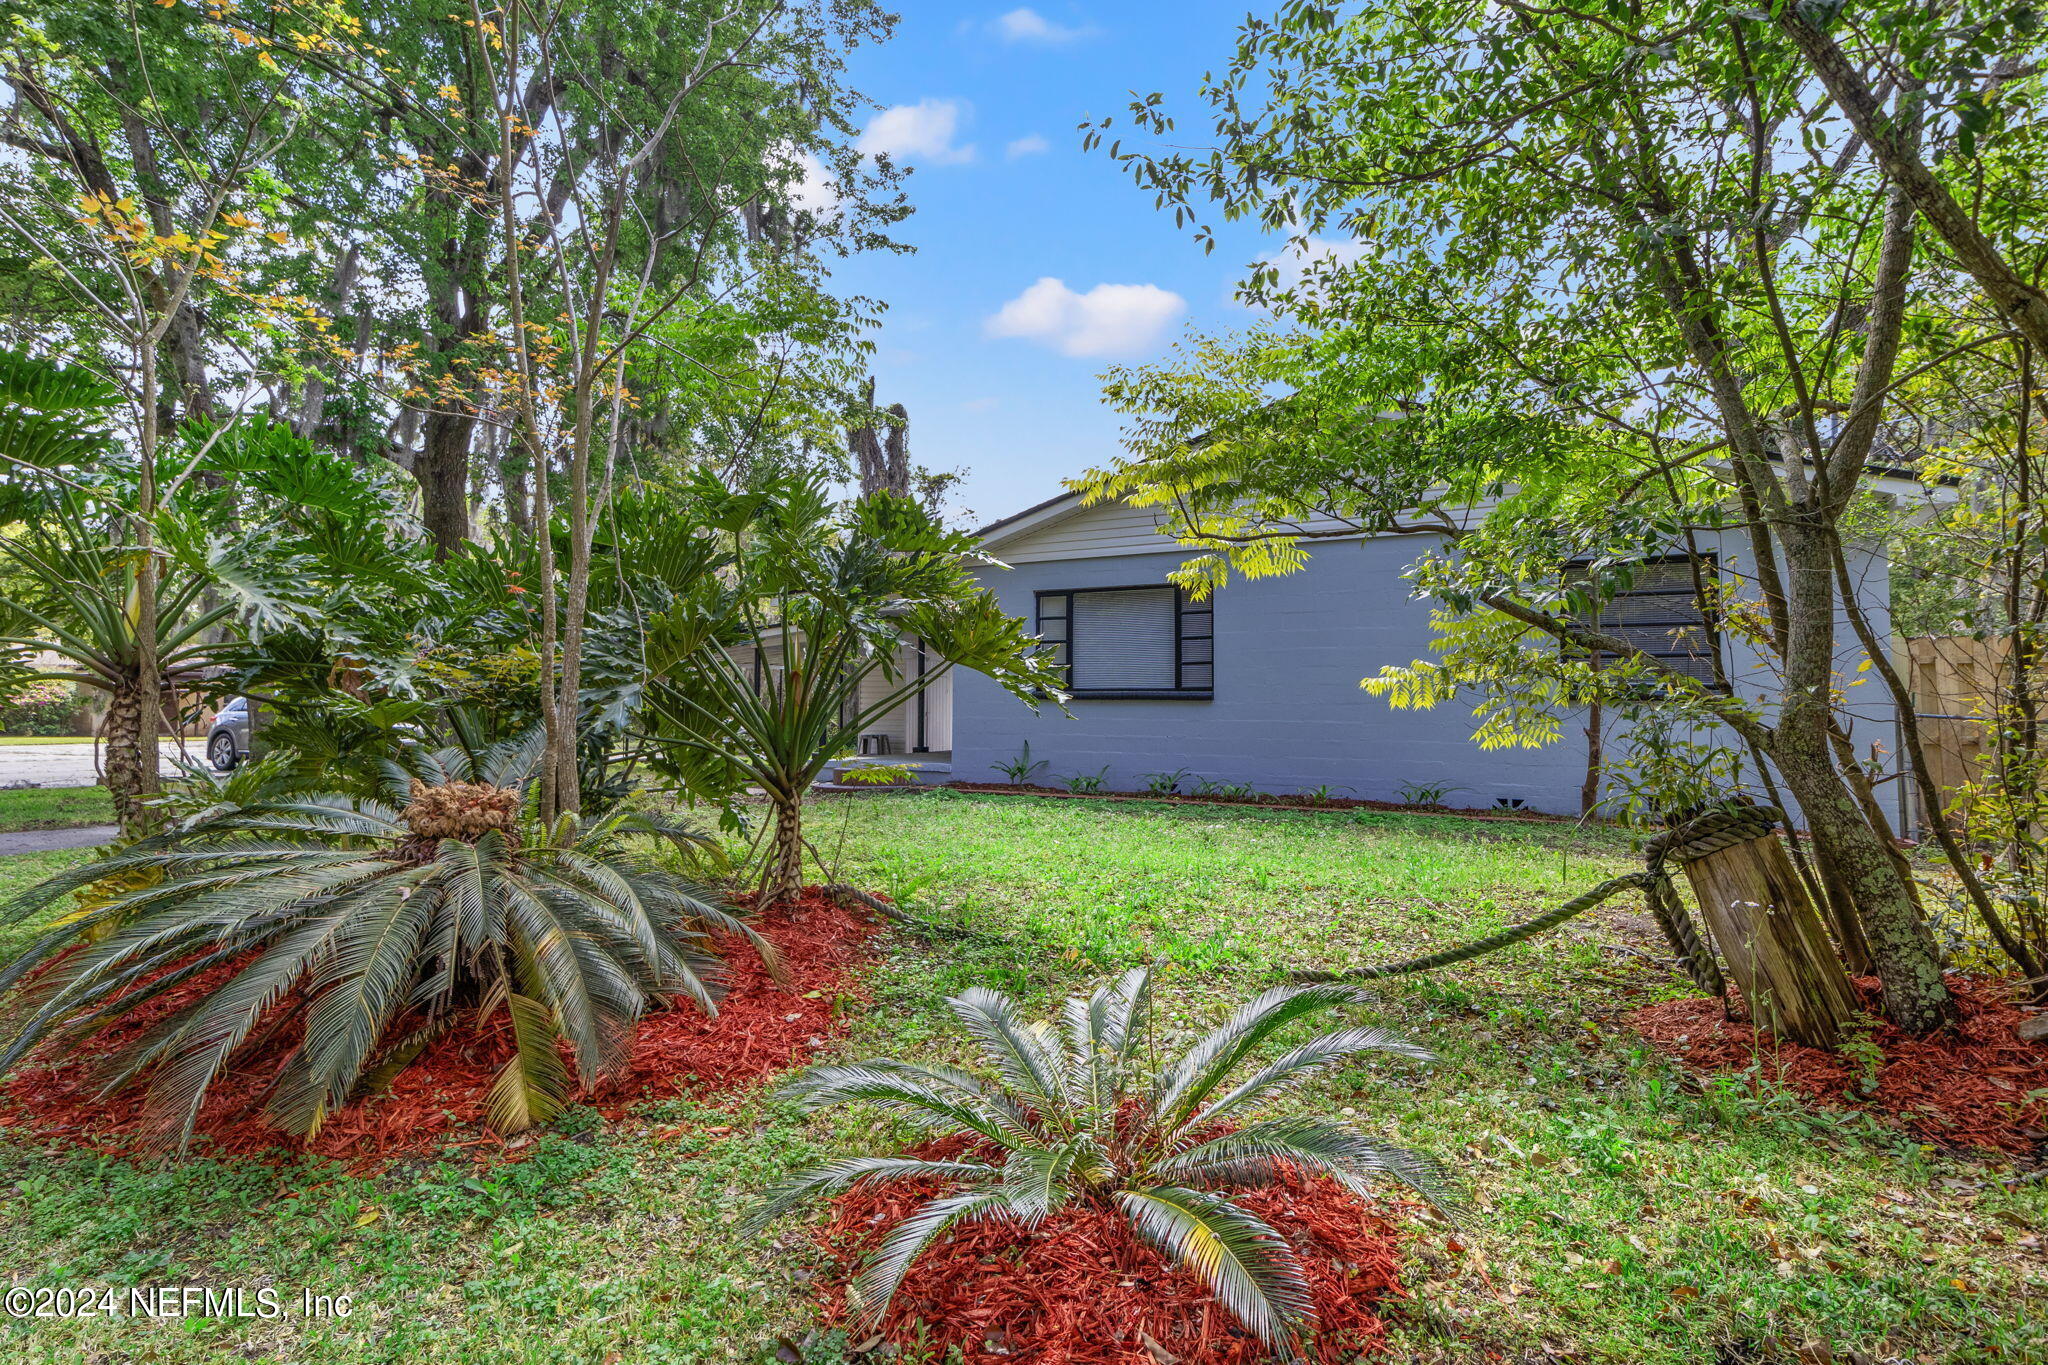 Jacksonville, FL home for sale located at 9124 8TH Avenue, Jacksonville, FL 32208